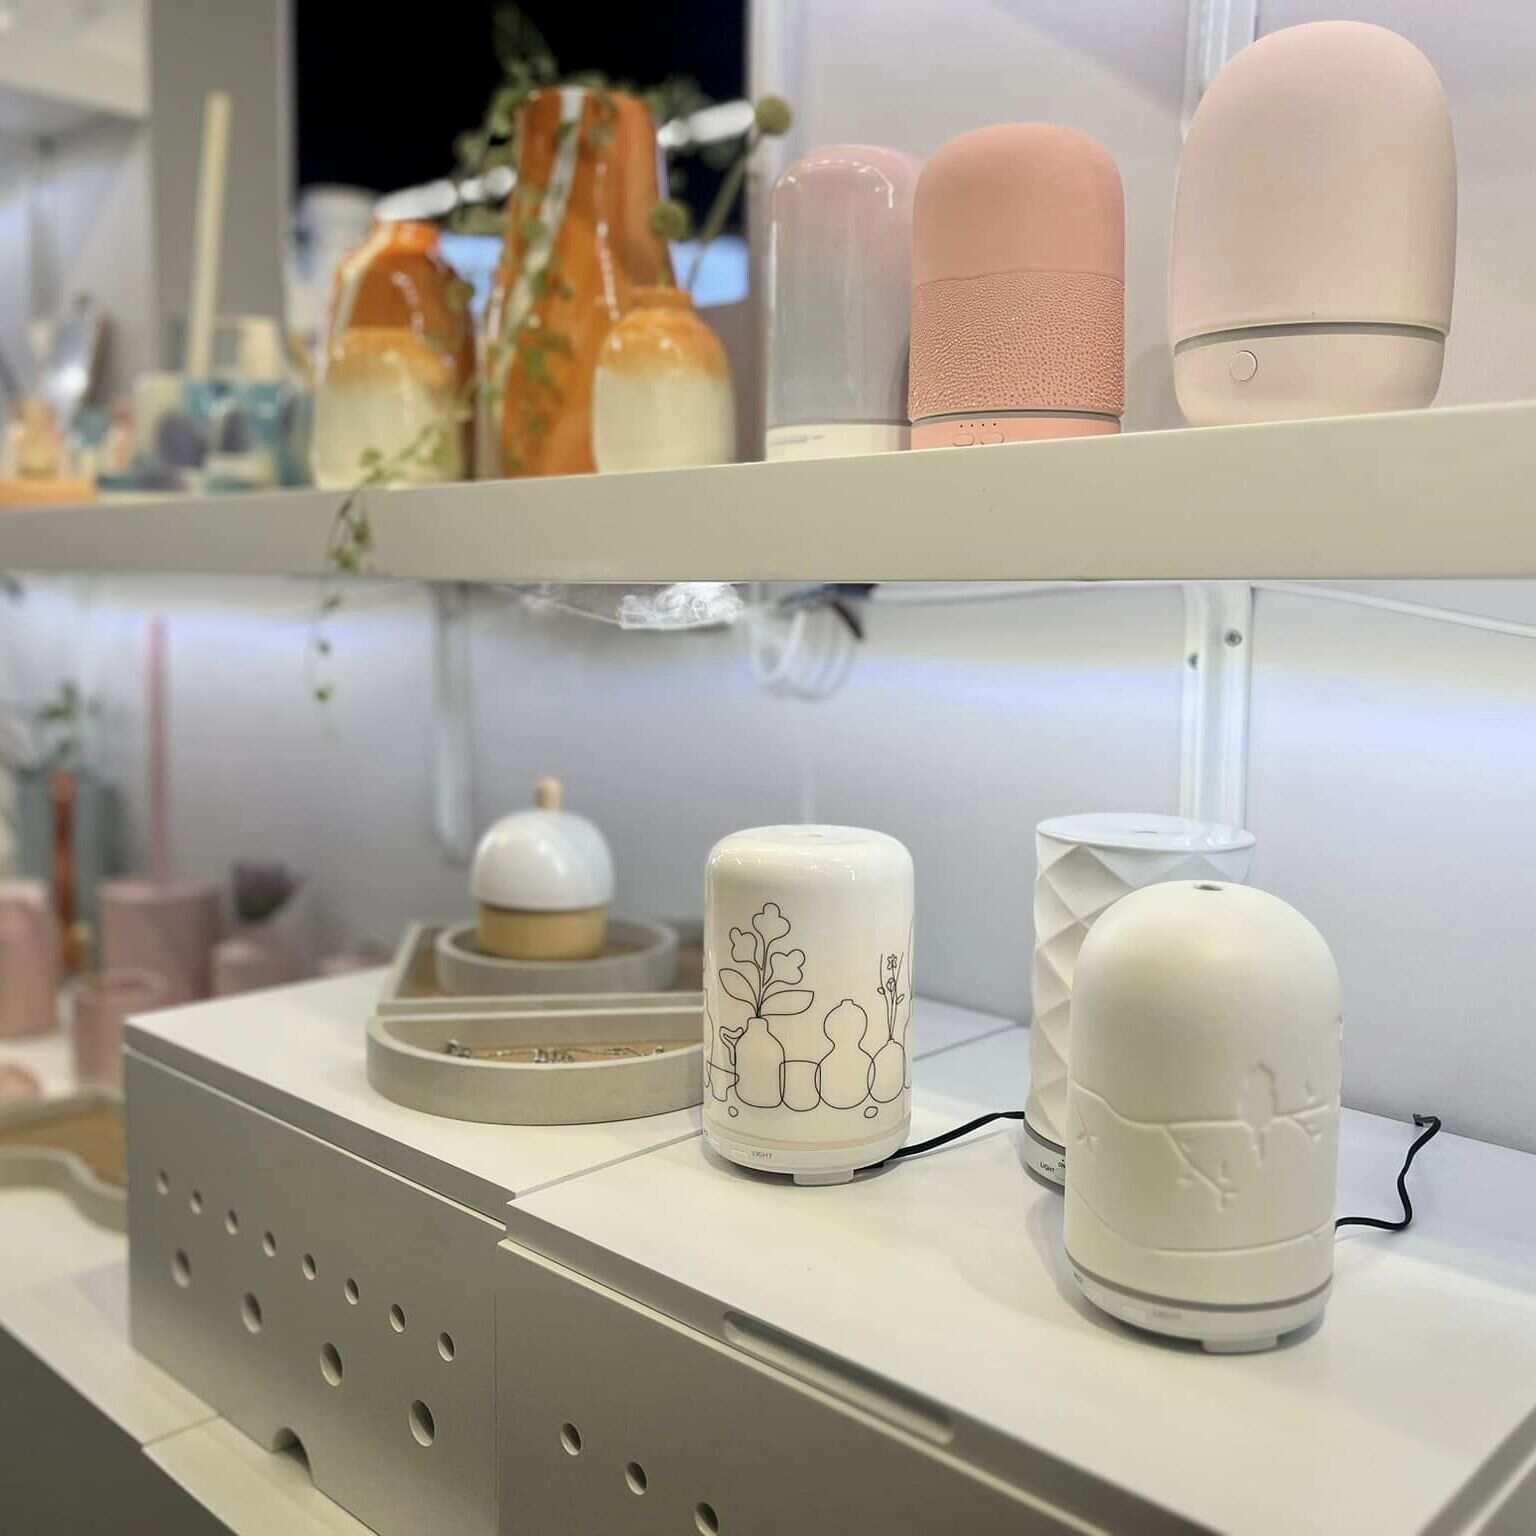 Products displayed at Ambiente'24 exhibition